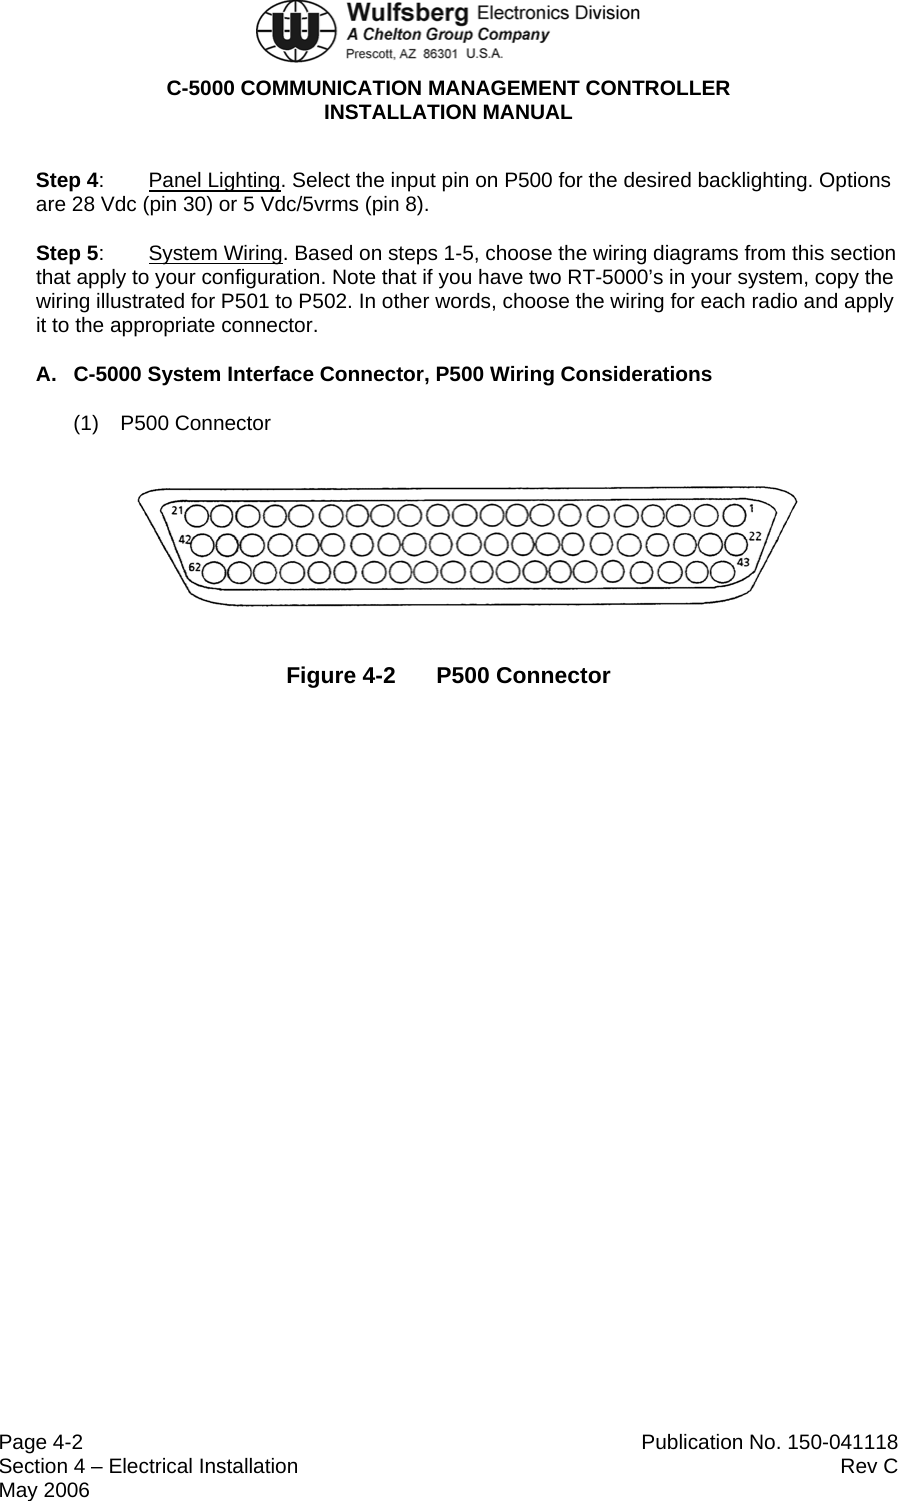  C-5000 COMMUNICATION MANAGEMENT CONTROLLER INSTALLATION MANUAL  Page 4-2  Publication No. 150-041118 Section 4 – Electrical Installation  Rev C May 2006 Step 4:  Panel Lighting. Select the input pin on P500 for the desired backlighting. Options are 28 Vdc (pin 30) or 5 Vdc/5vrms (pin 8). Step 5:  System Wiring. Based on steps 1-5, choose the wiring diagrams from this section that apply to your configuration. Note that if you have two RT-5000’s in your system, copy the wiring illustrated for P501 to P502. In other words, choose the wiring for each radio and apply it to the appropriate connector. A.  C-5000 System Interface Connector, P500 Wiring Considerations (1) P500 Connector  Figure 4-2  P500 Connector 